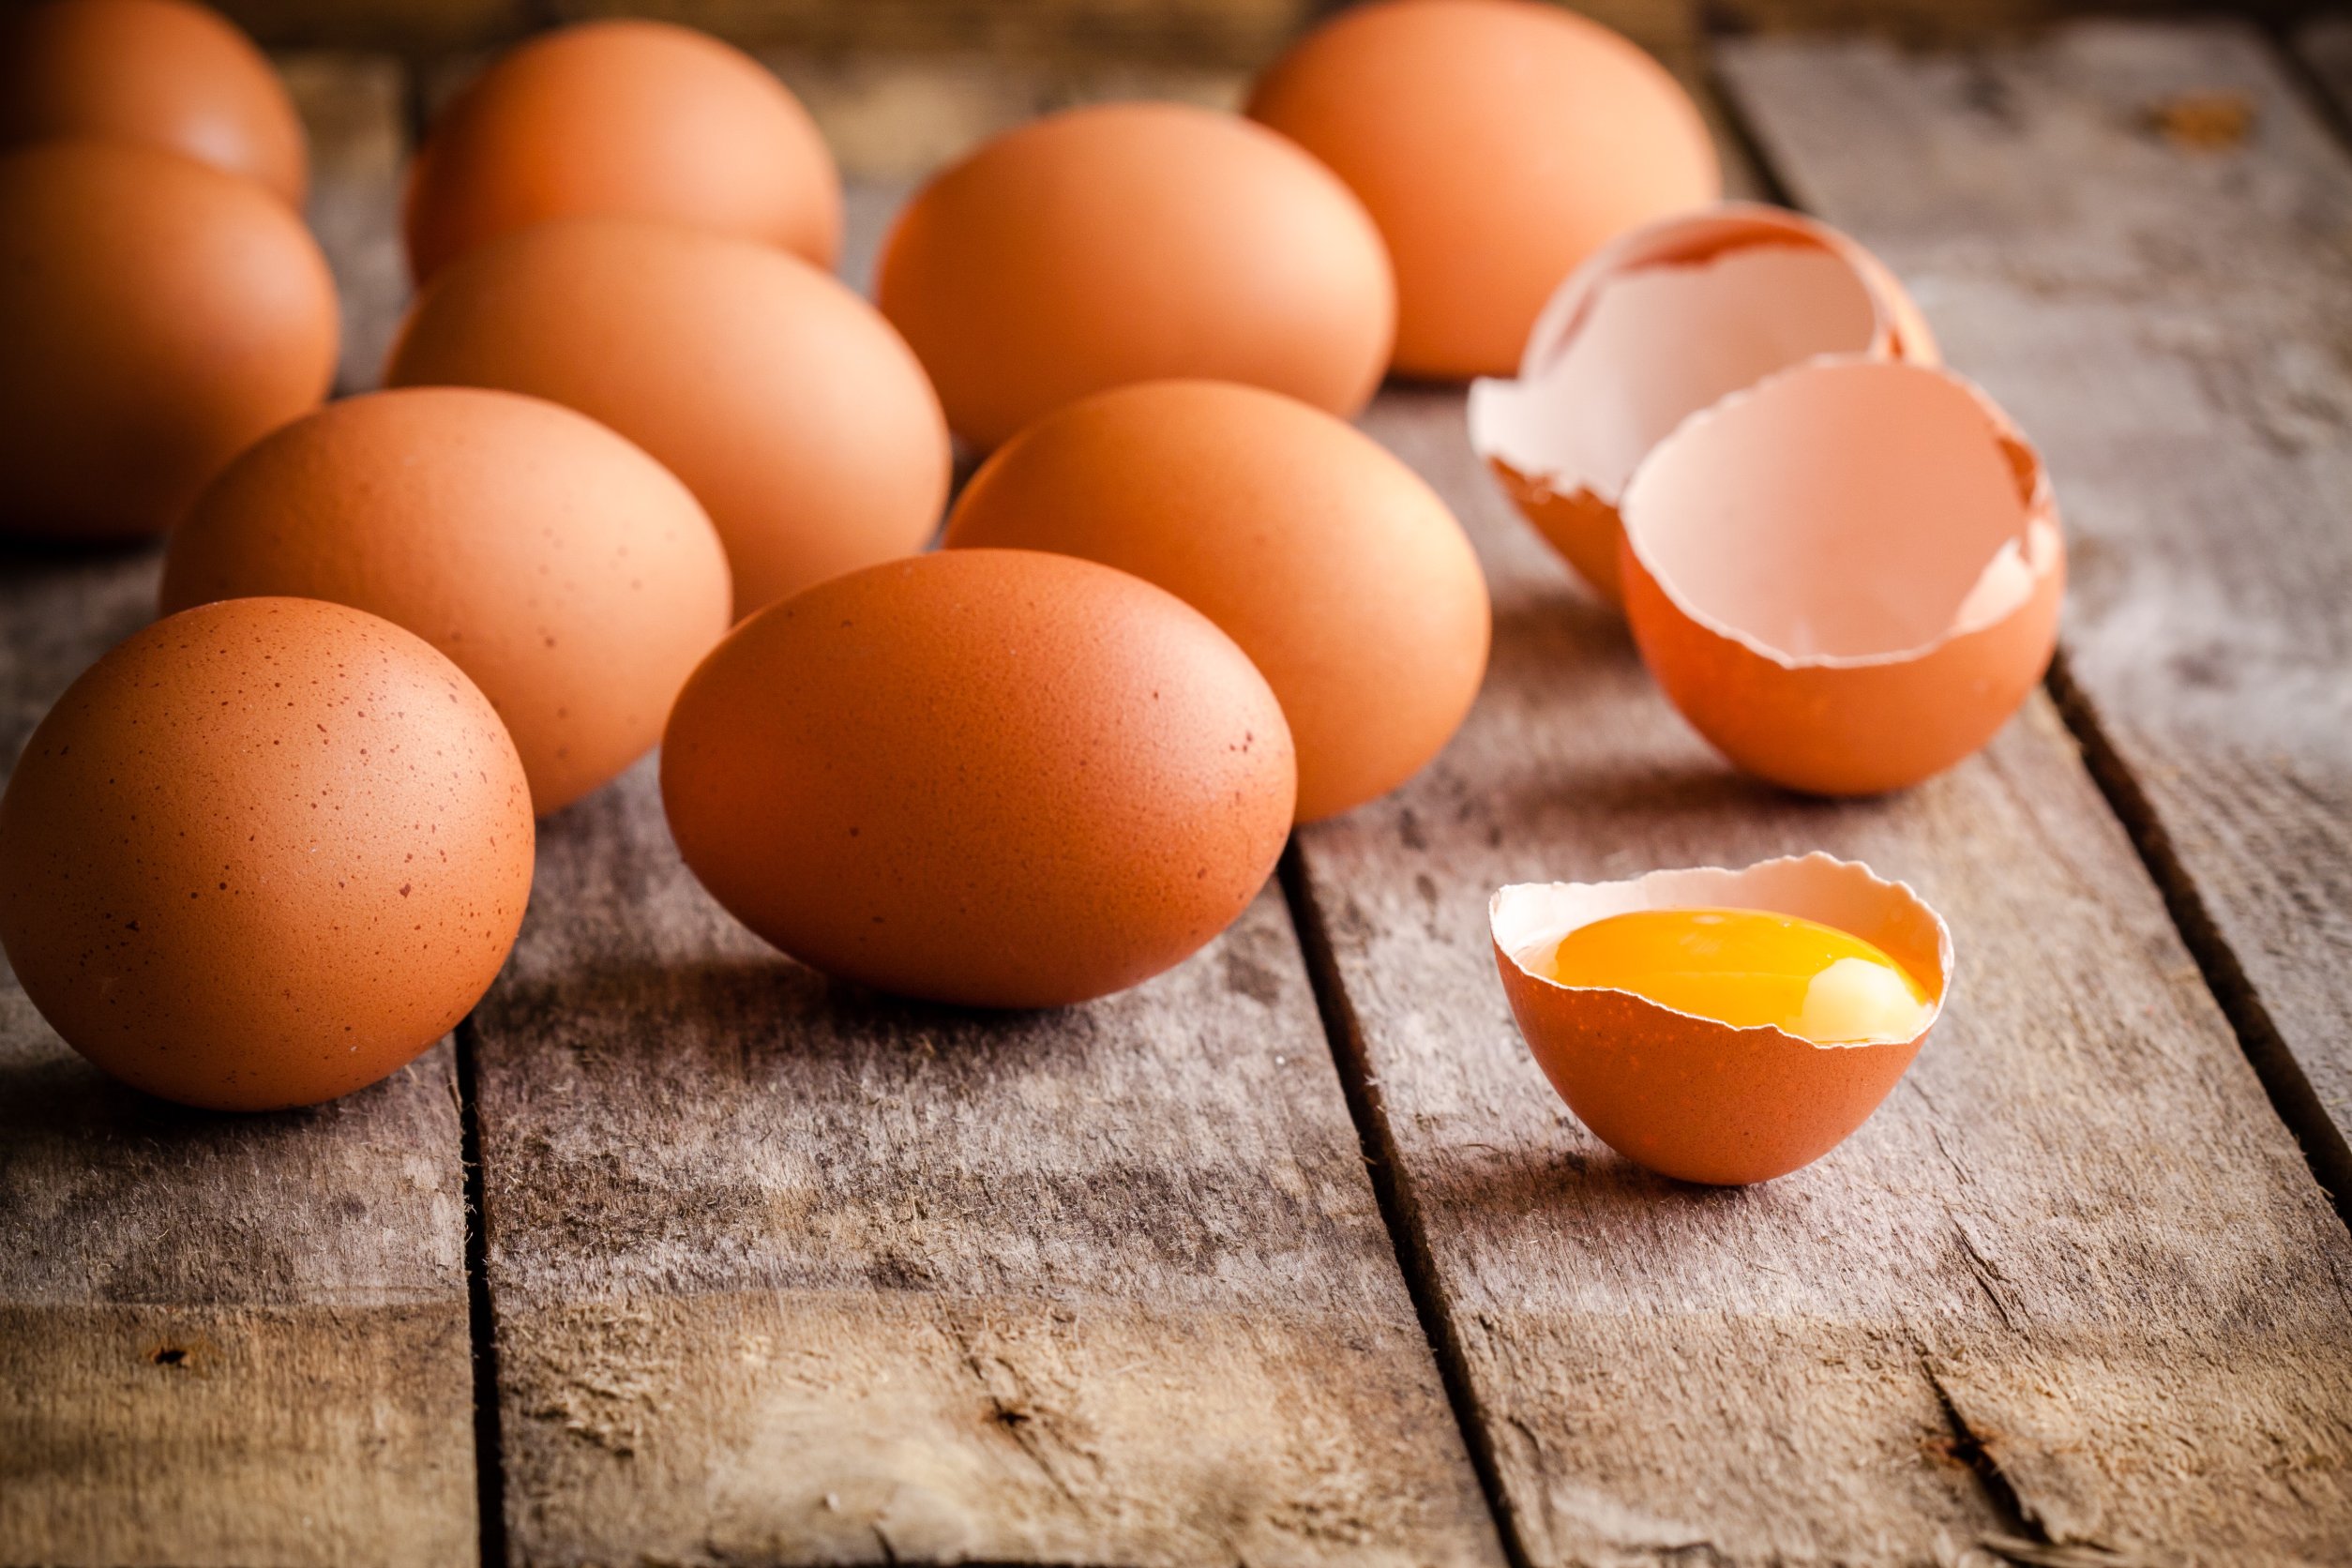 Are Eggs Good or Bad for Your Health?